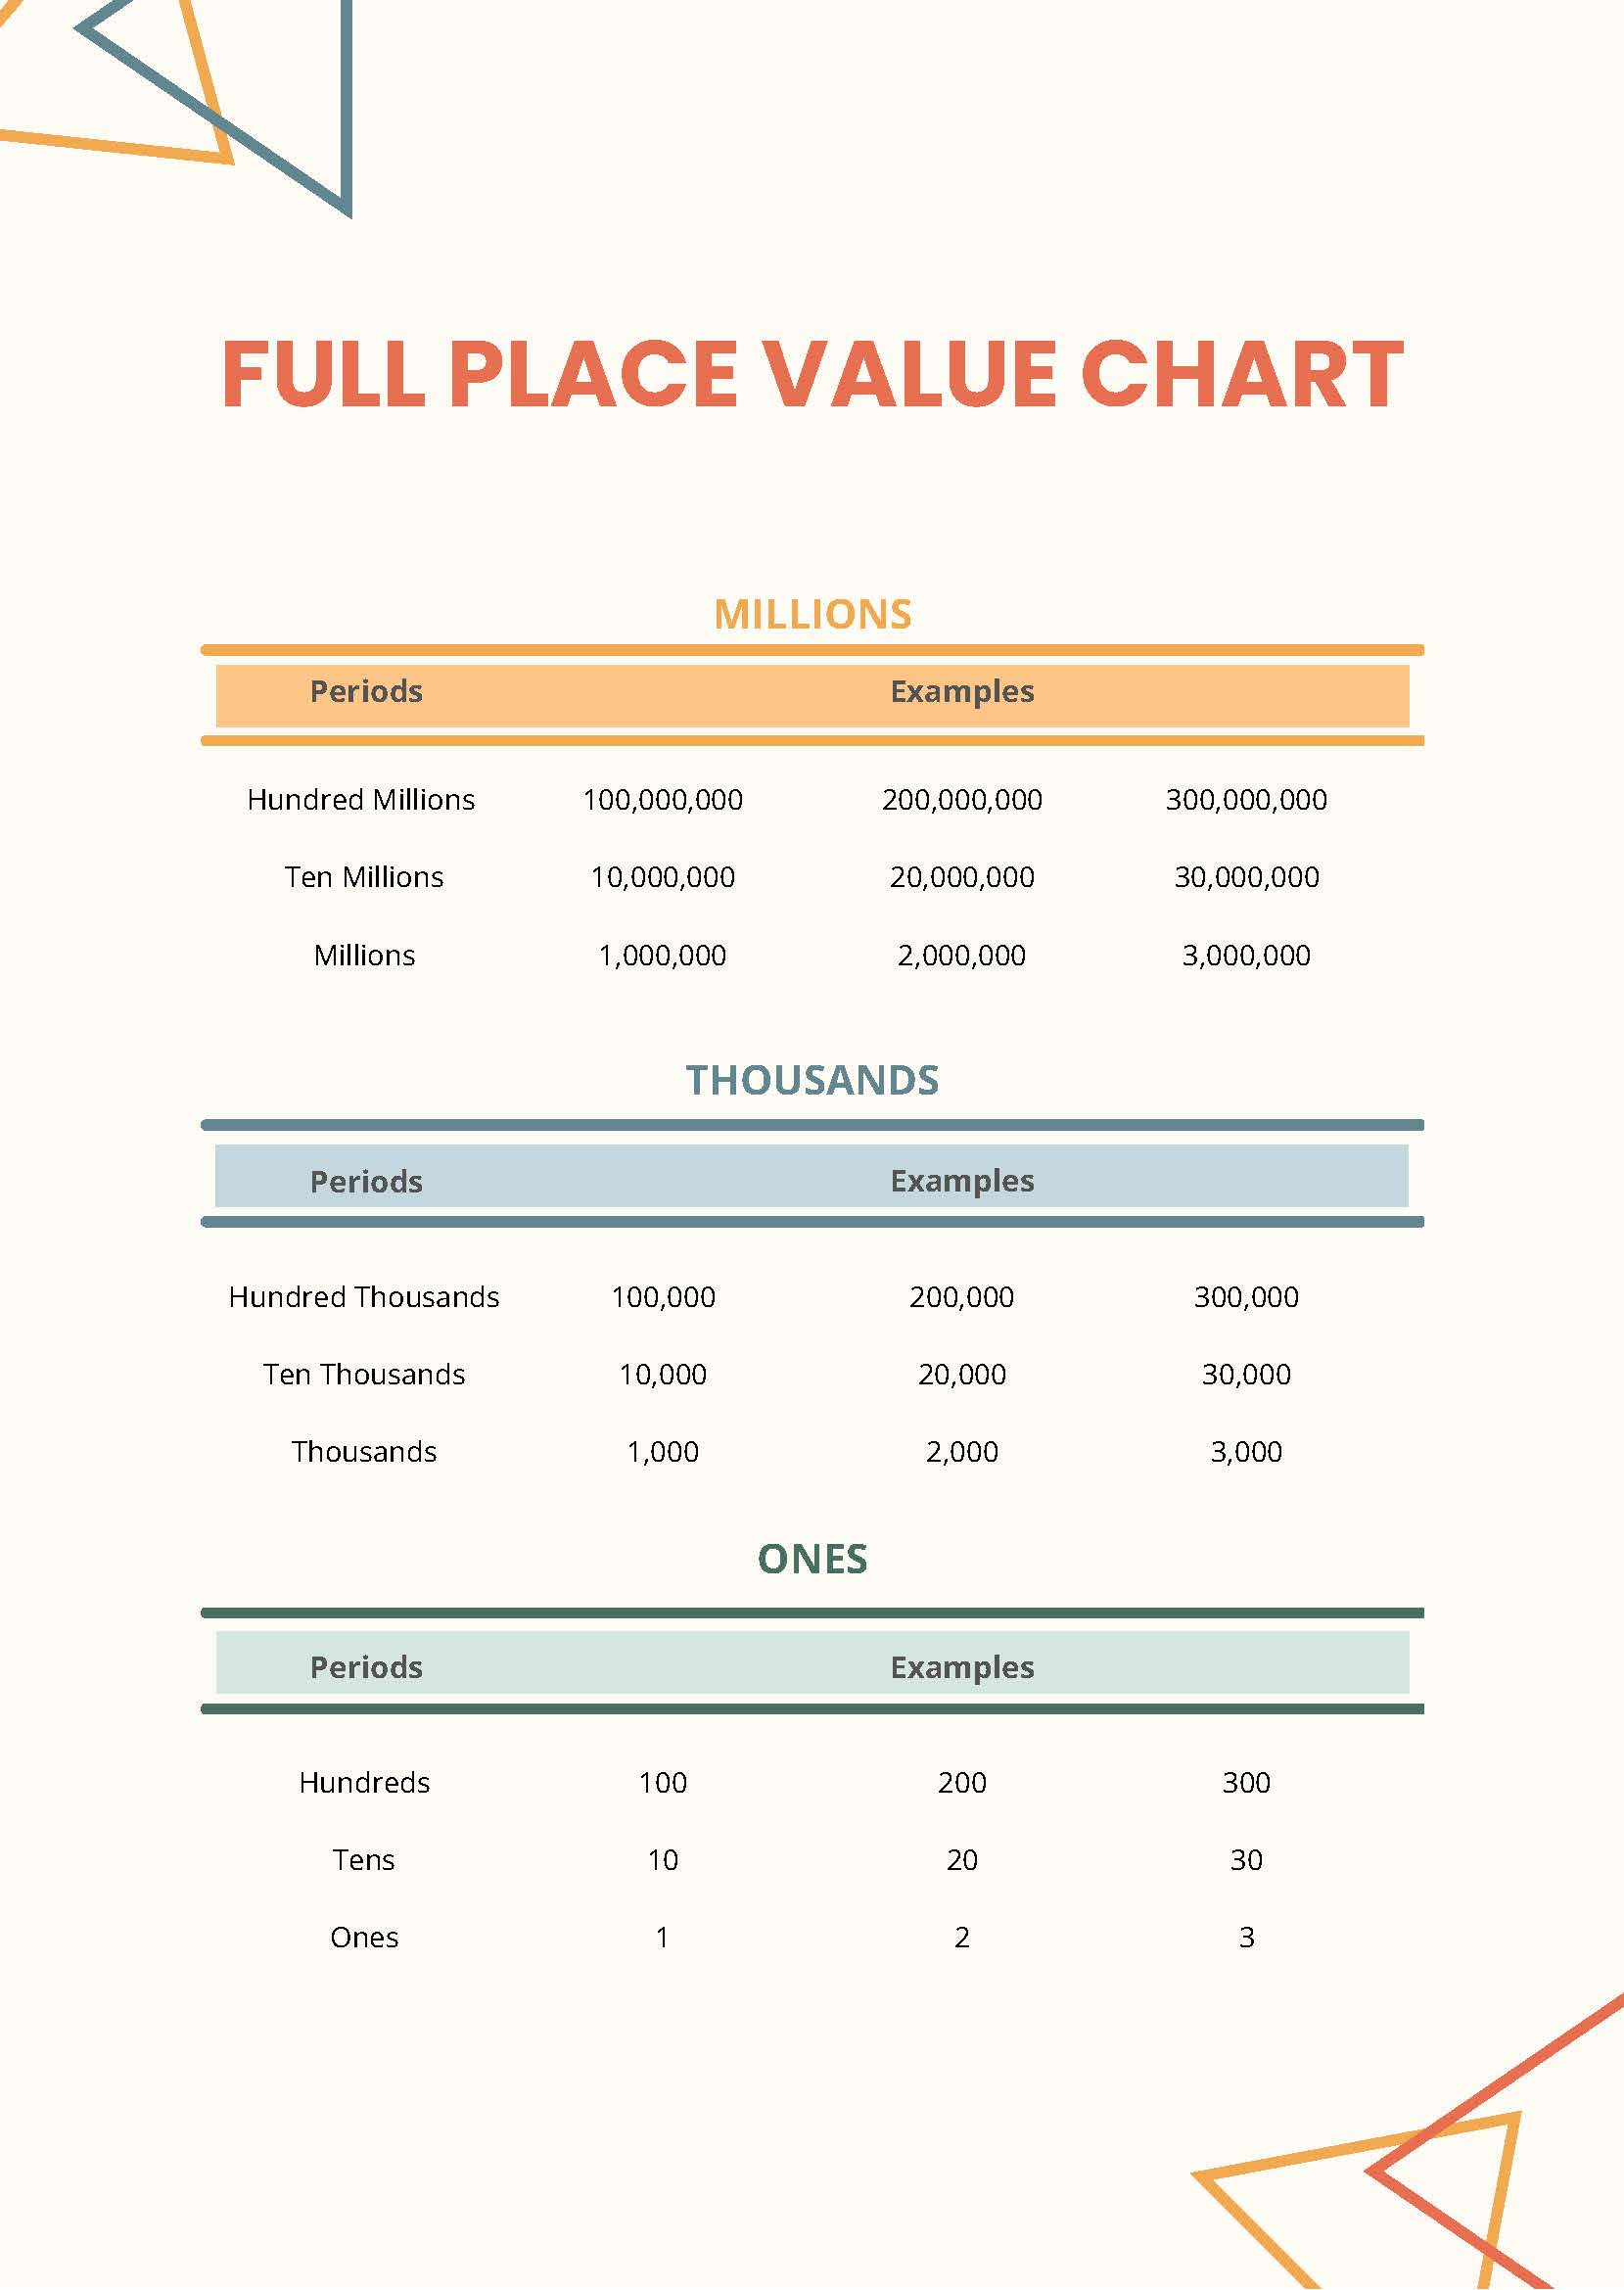 Full Place Value Chart